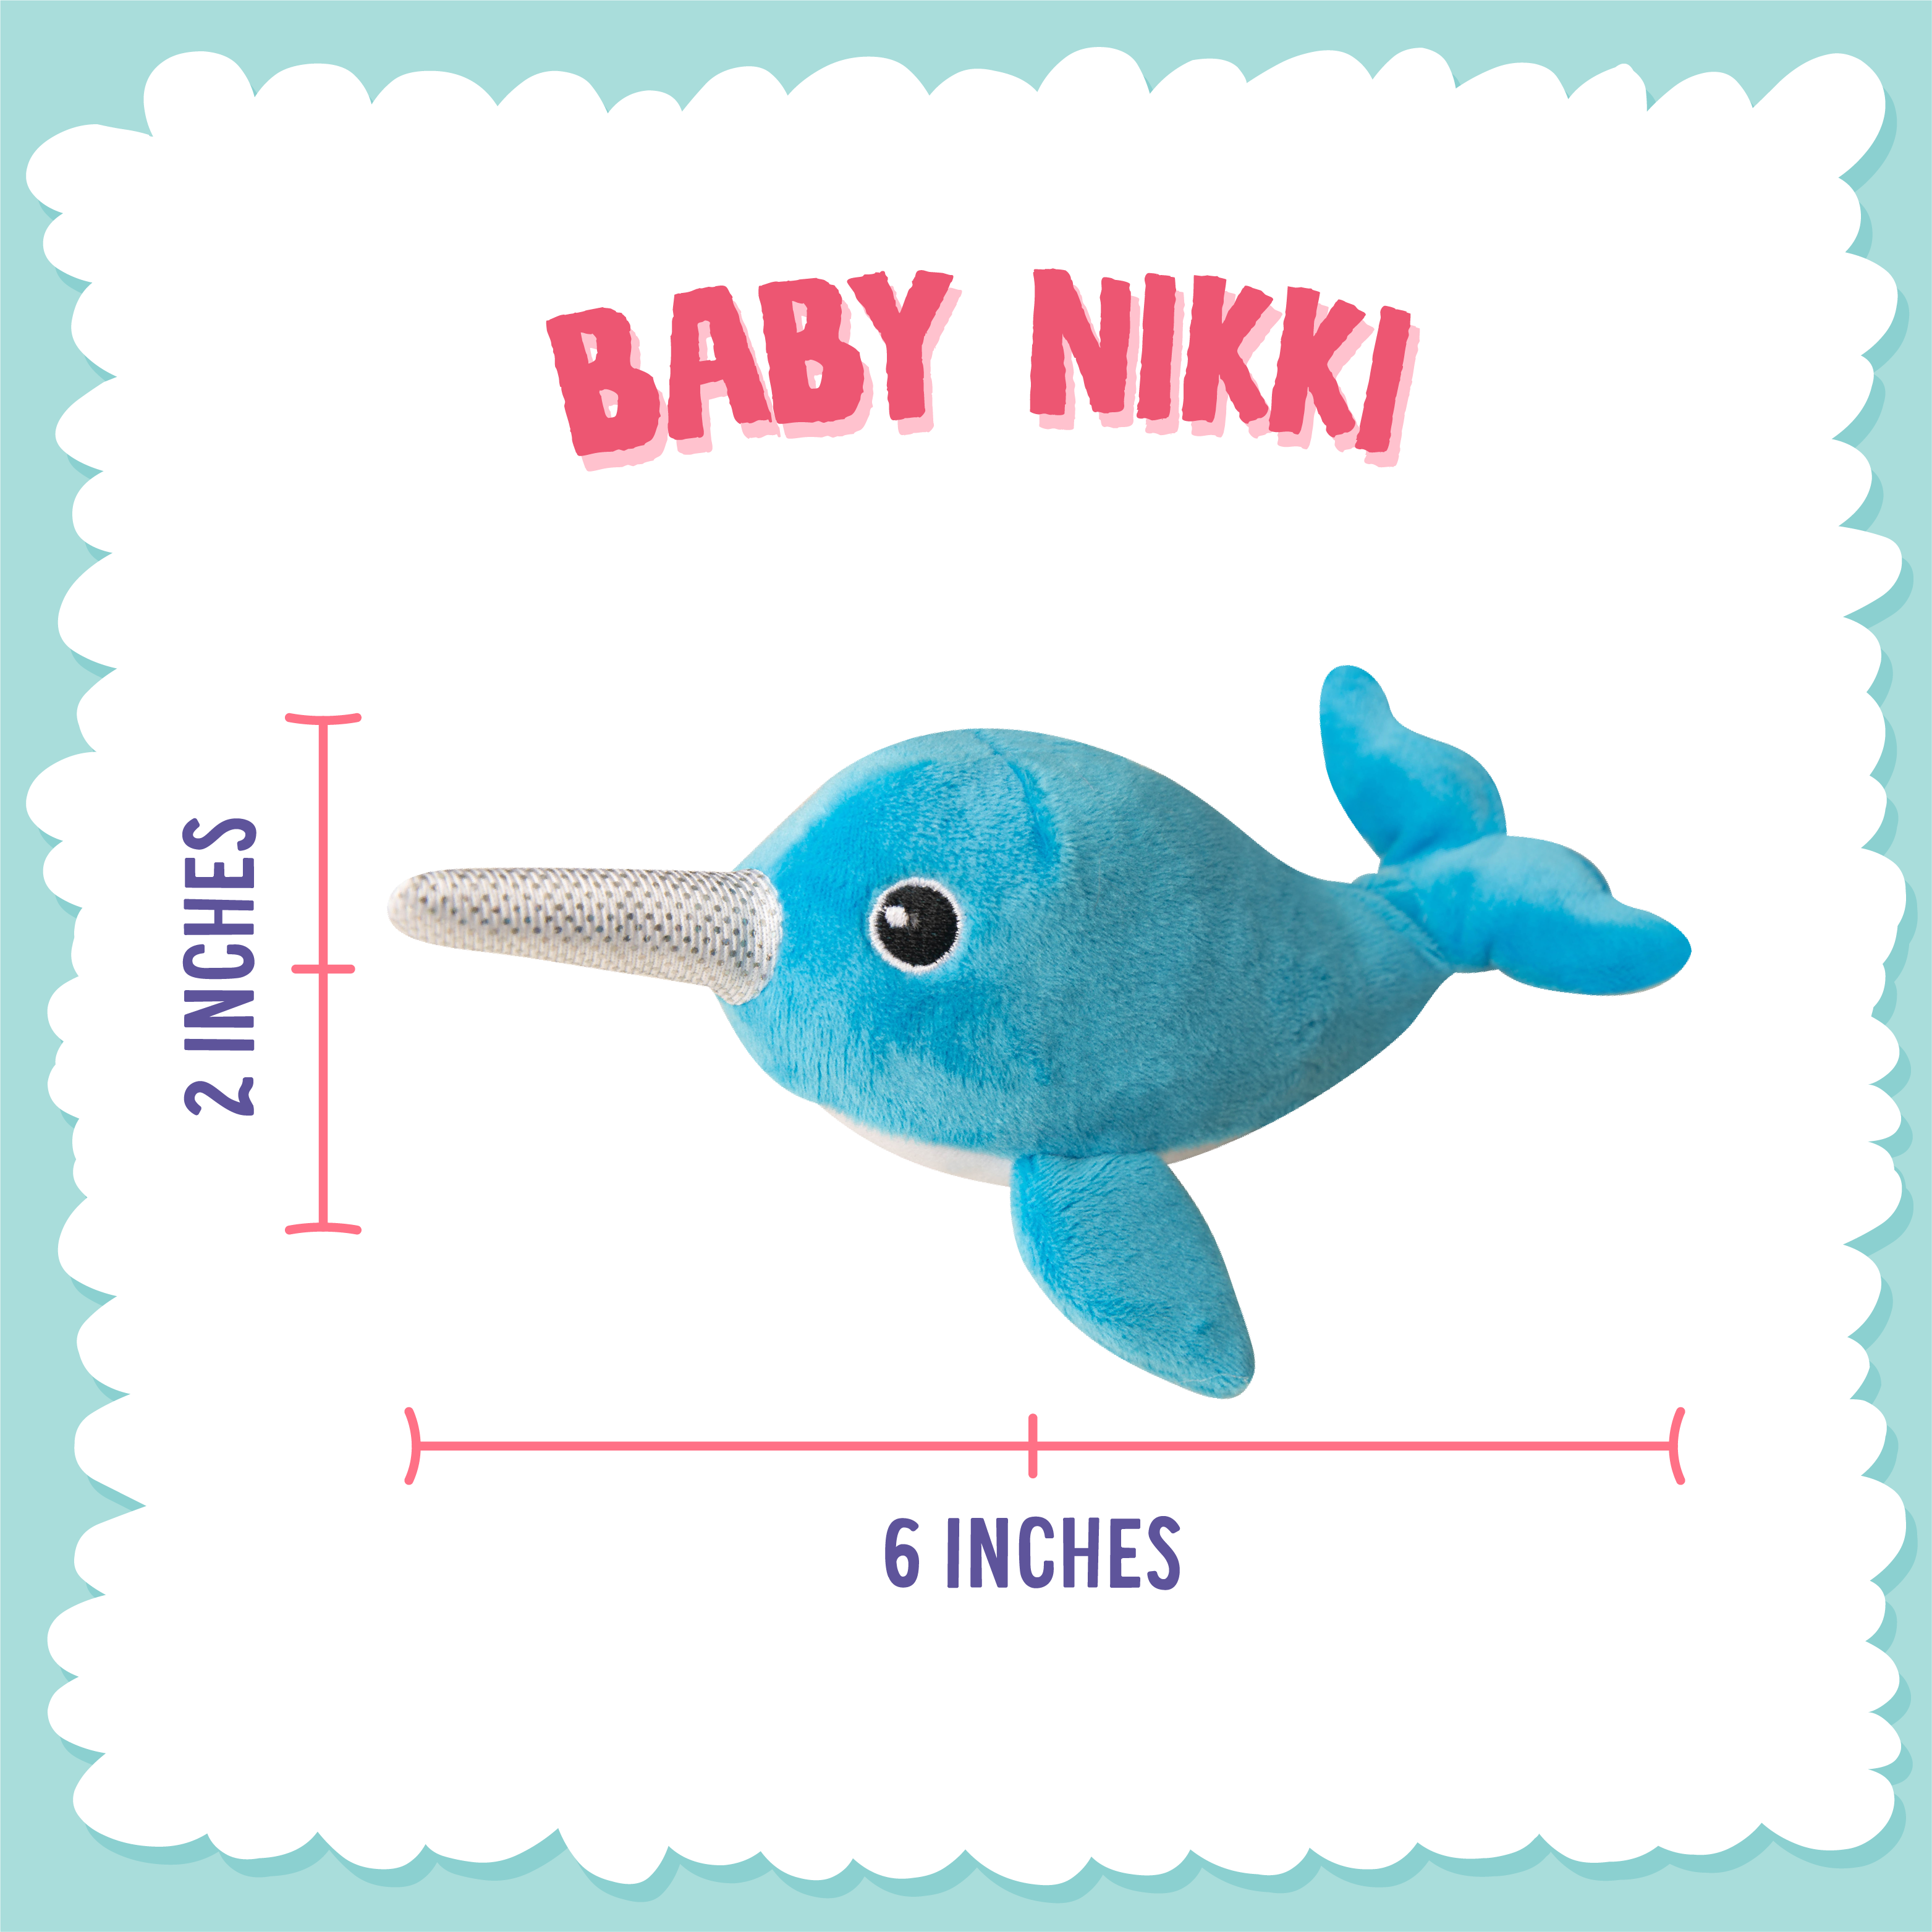 Baby Nikki the Narwhal